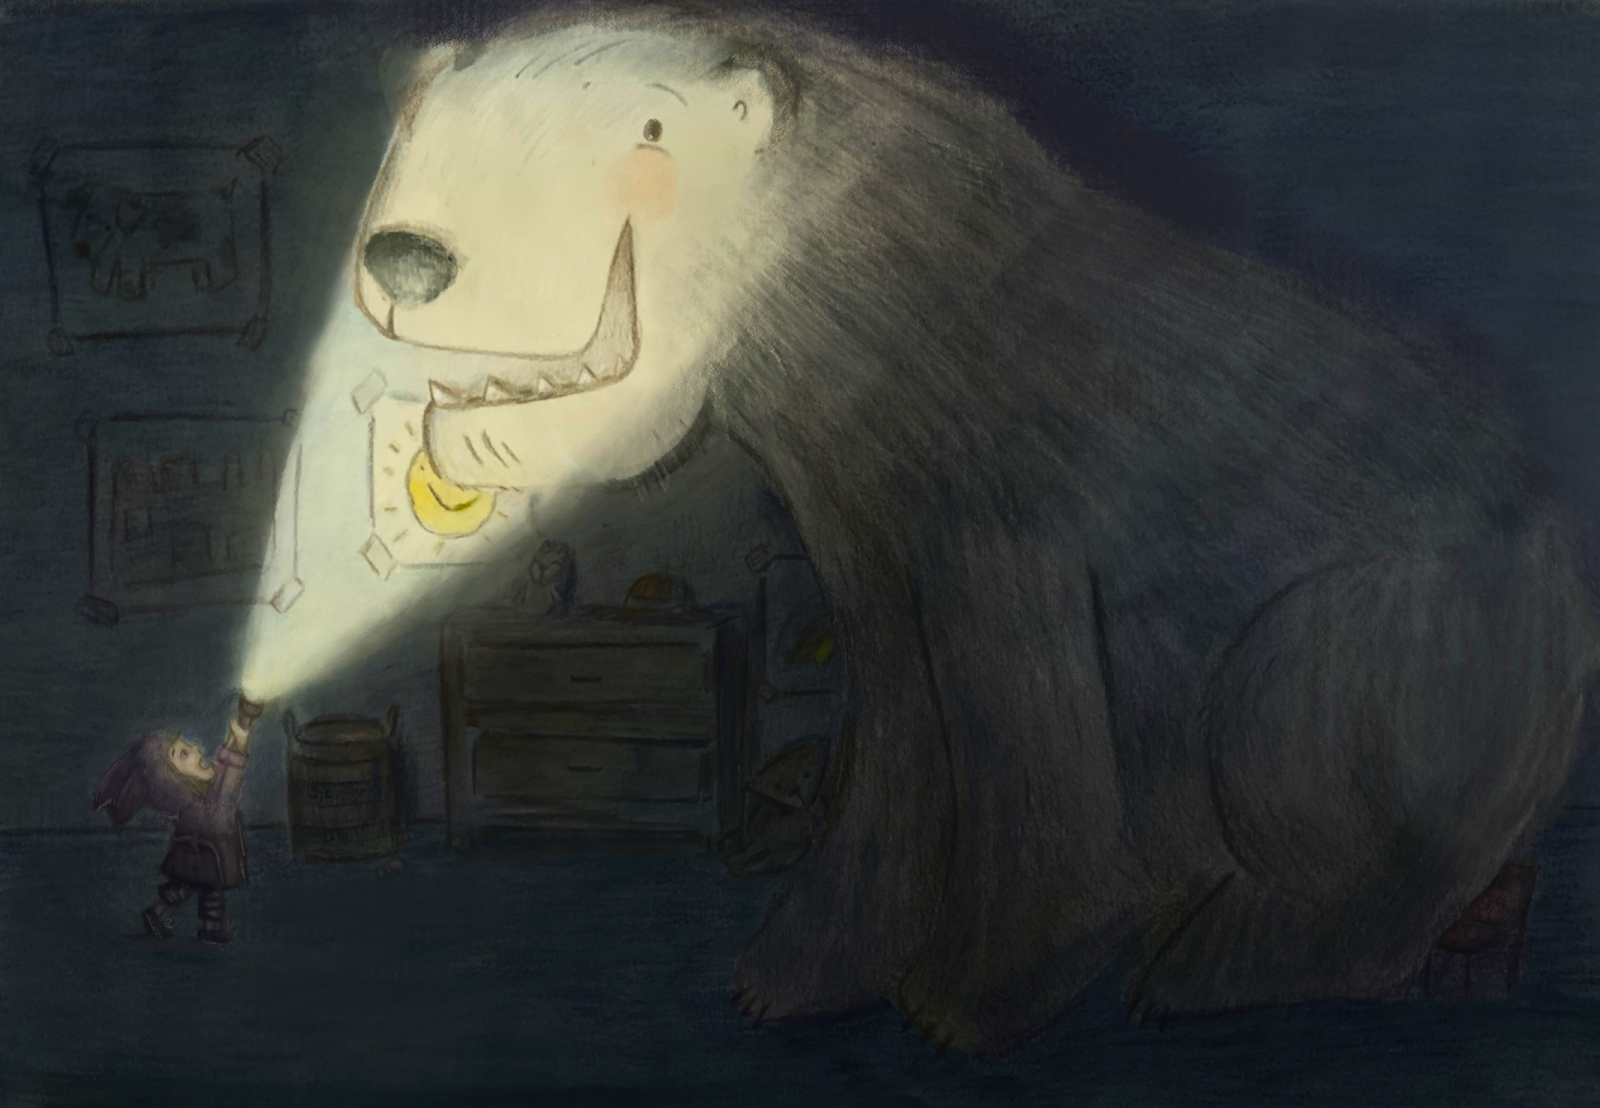 Flashlight reveals a big bear in the child's room